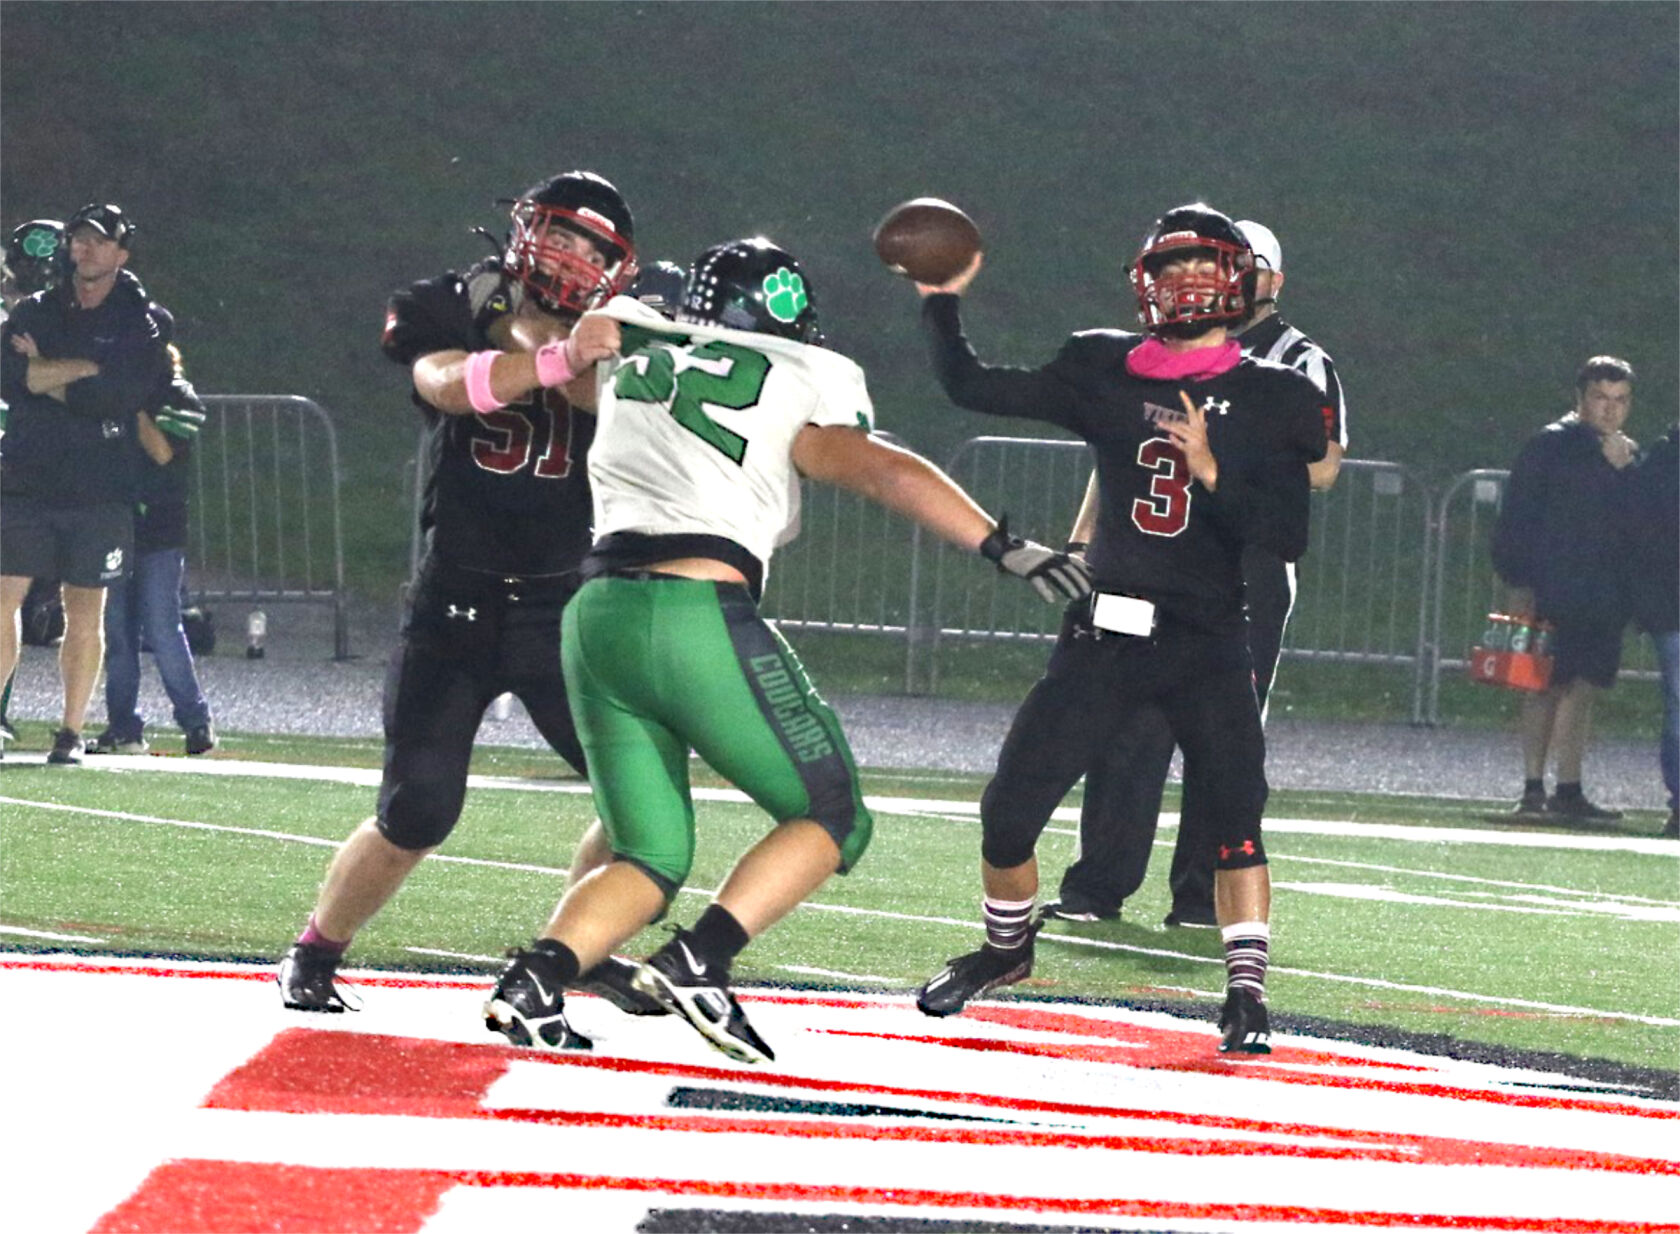 Cougars offense too much to overcome in rainy Vikings defeat